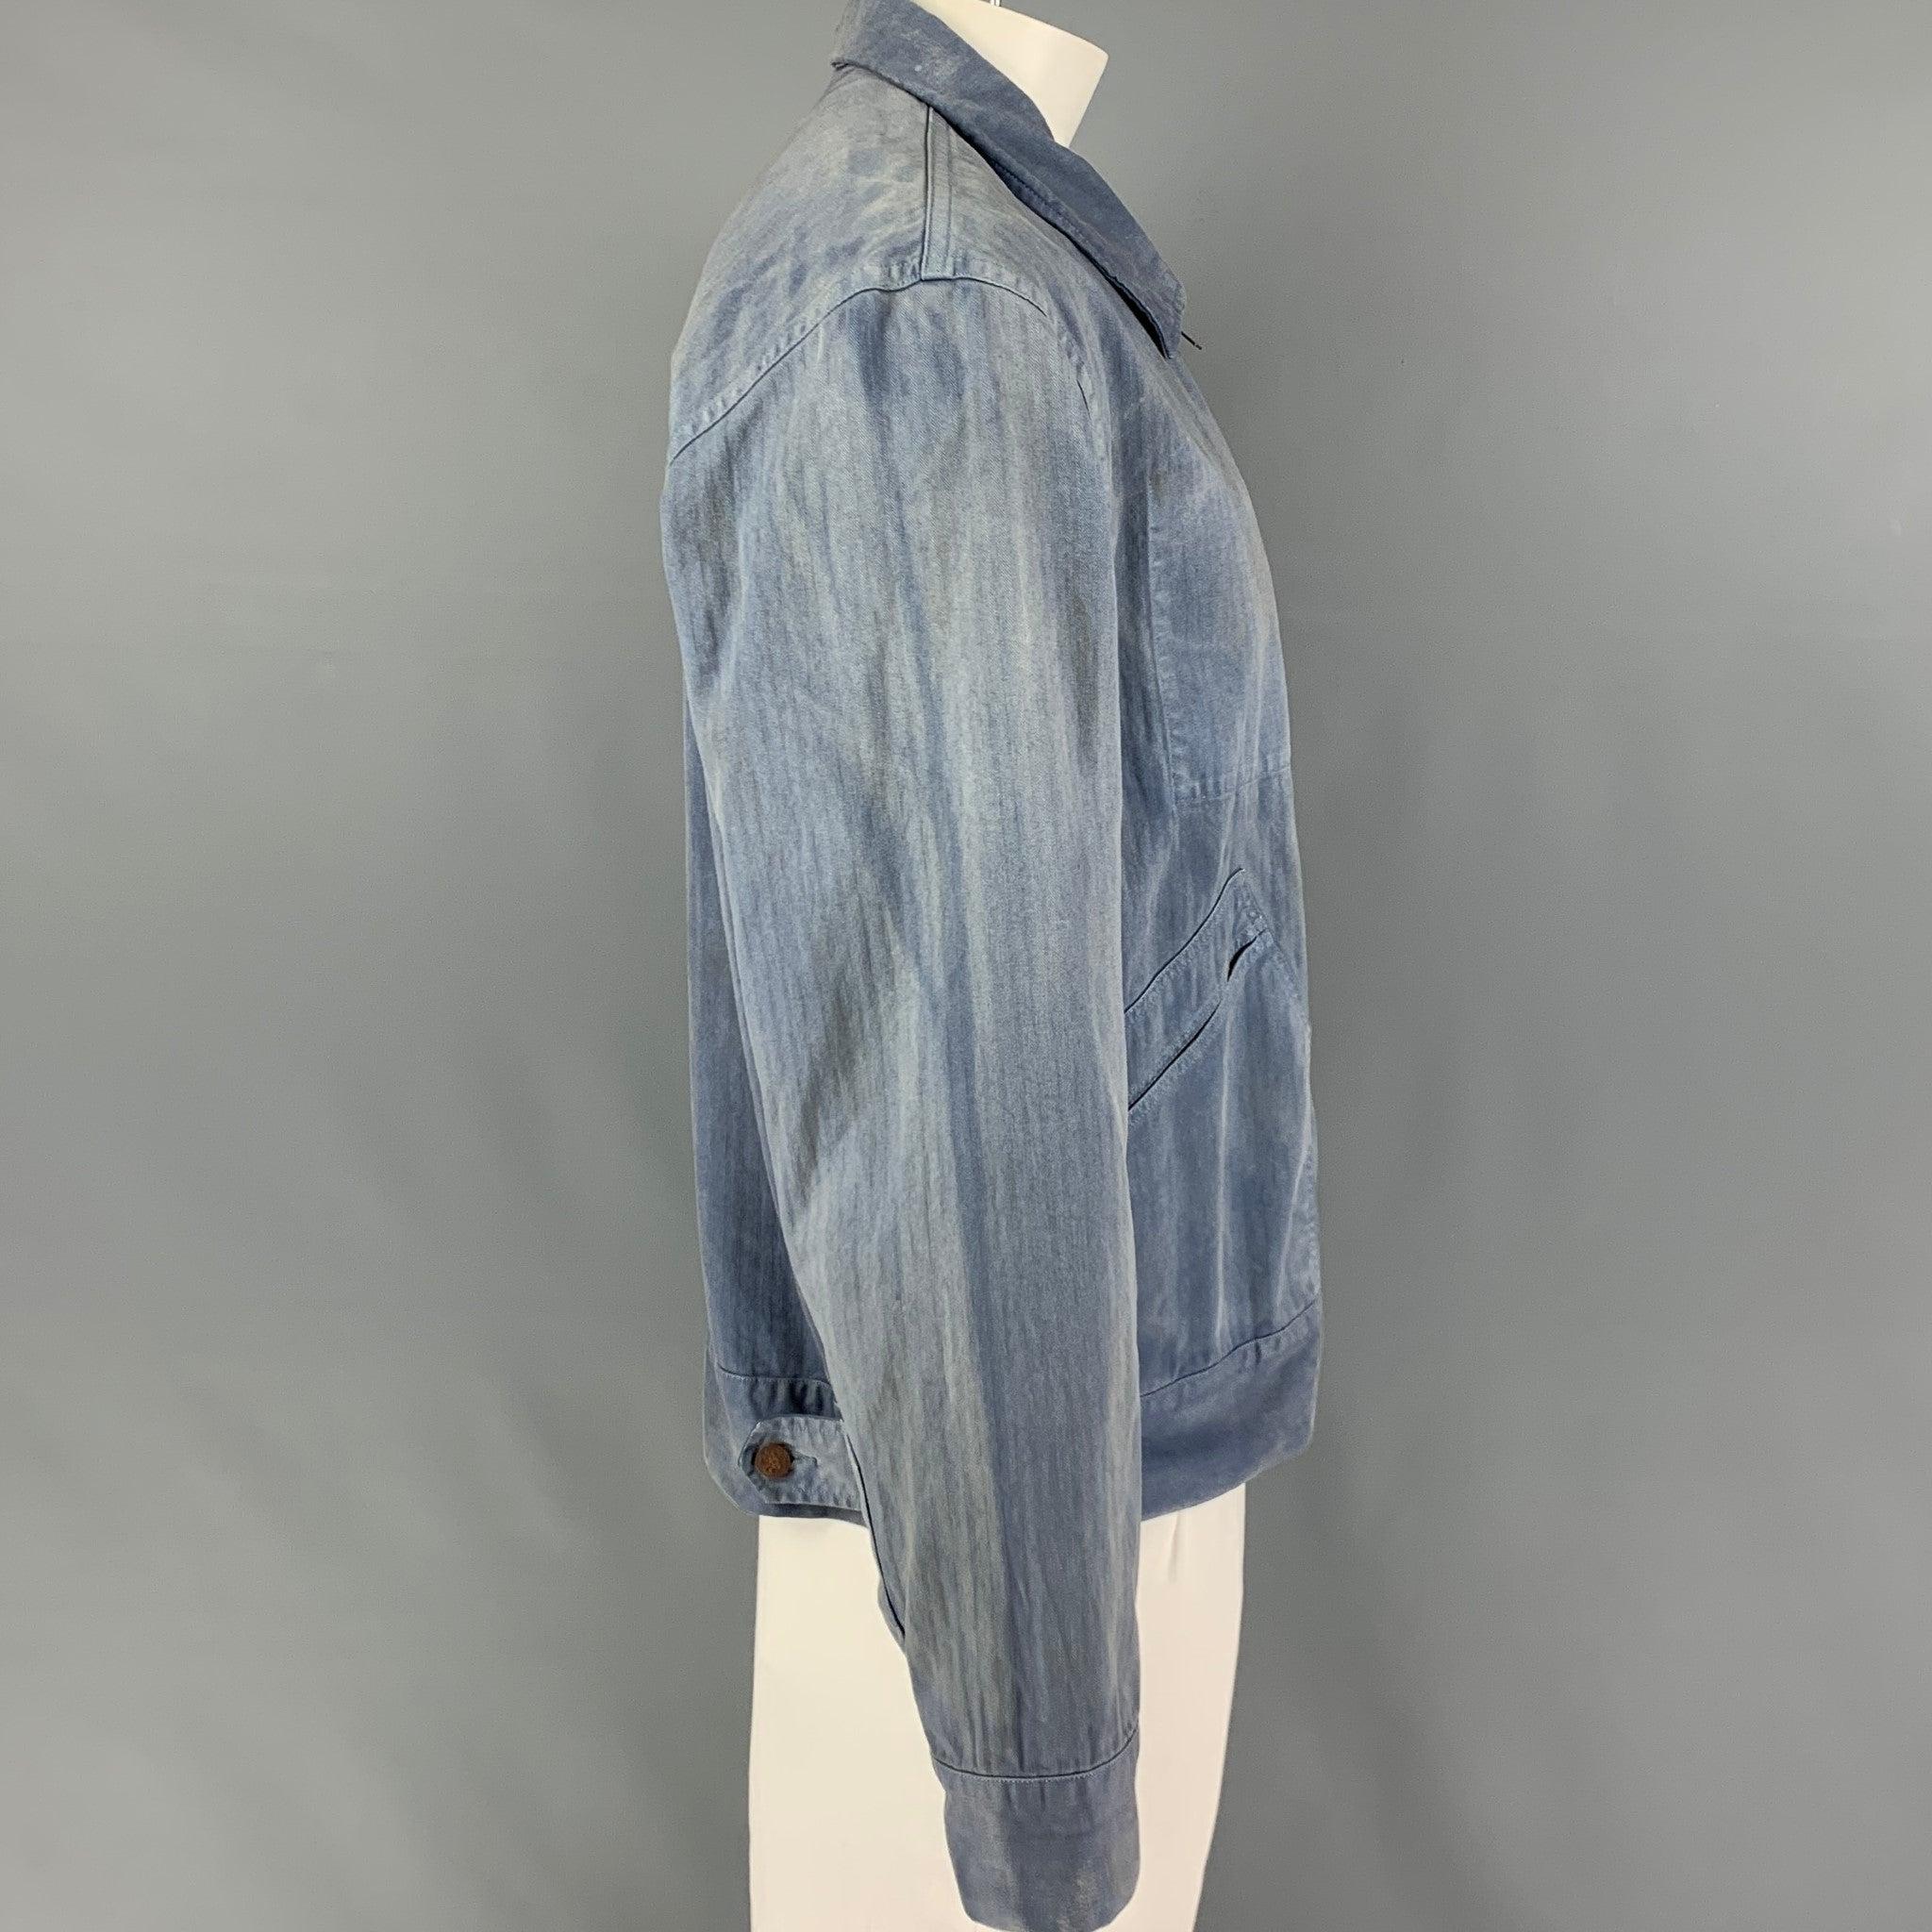 RRL by RALPH LAUREN jacket comes in a light blue washed cotton featuring a sleeve patch detail, front pockets, spread collar, and a full zip up closure.
Very Good
Pre-Owned Condition. 

Marked:   XL 

Measurements: 
 
Shoulder: 21 inches  Chest: 46